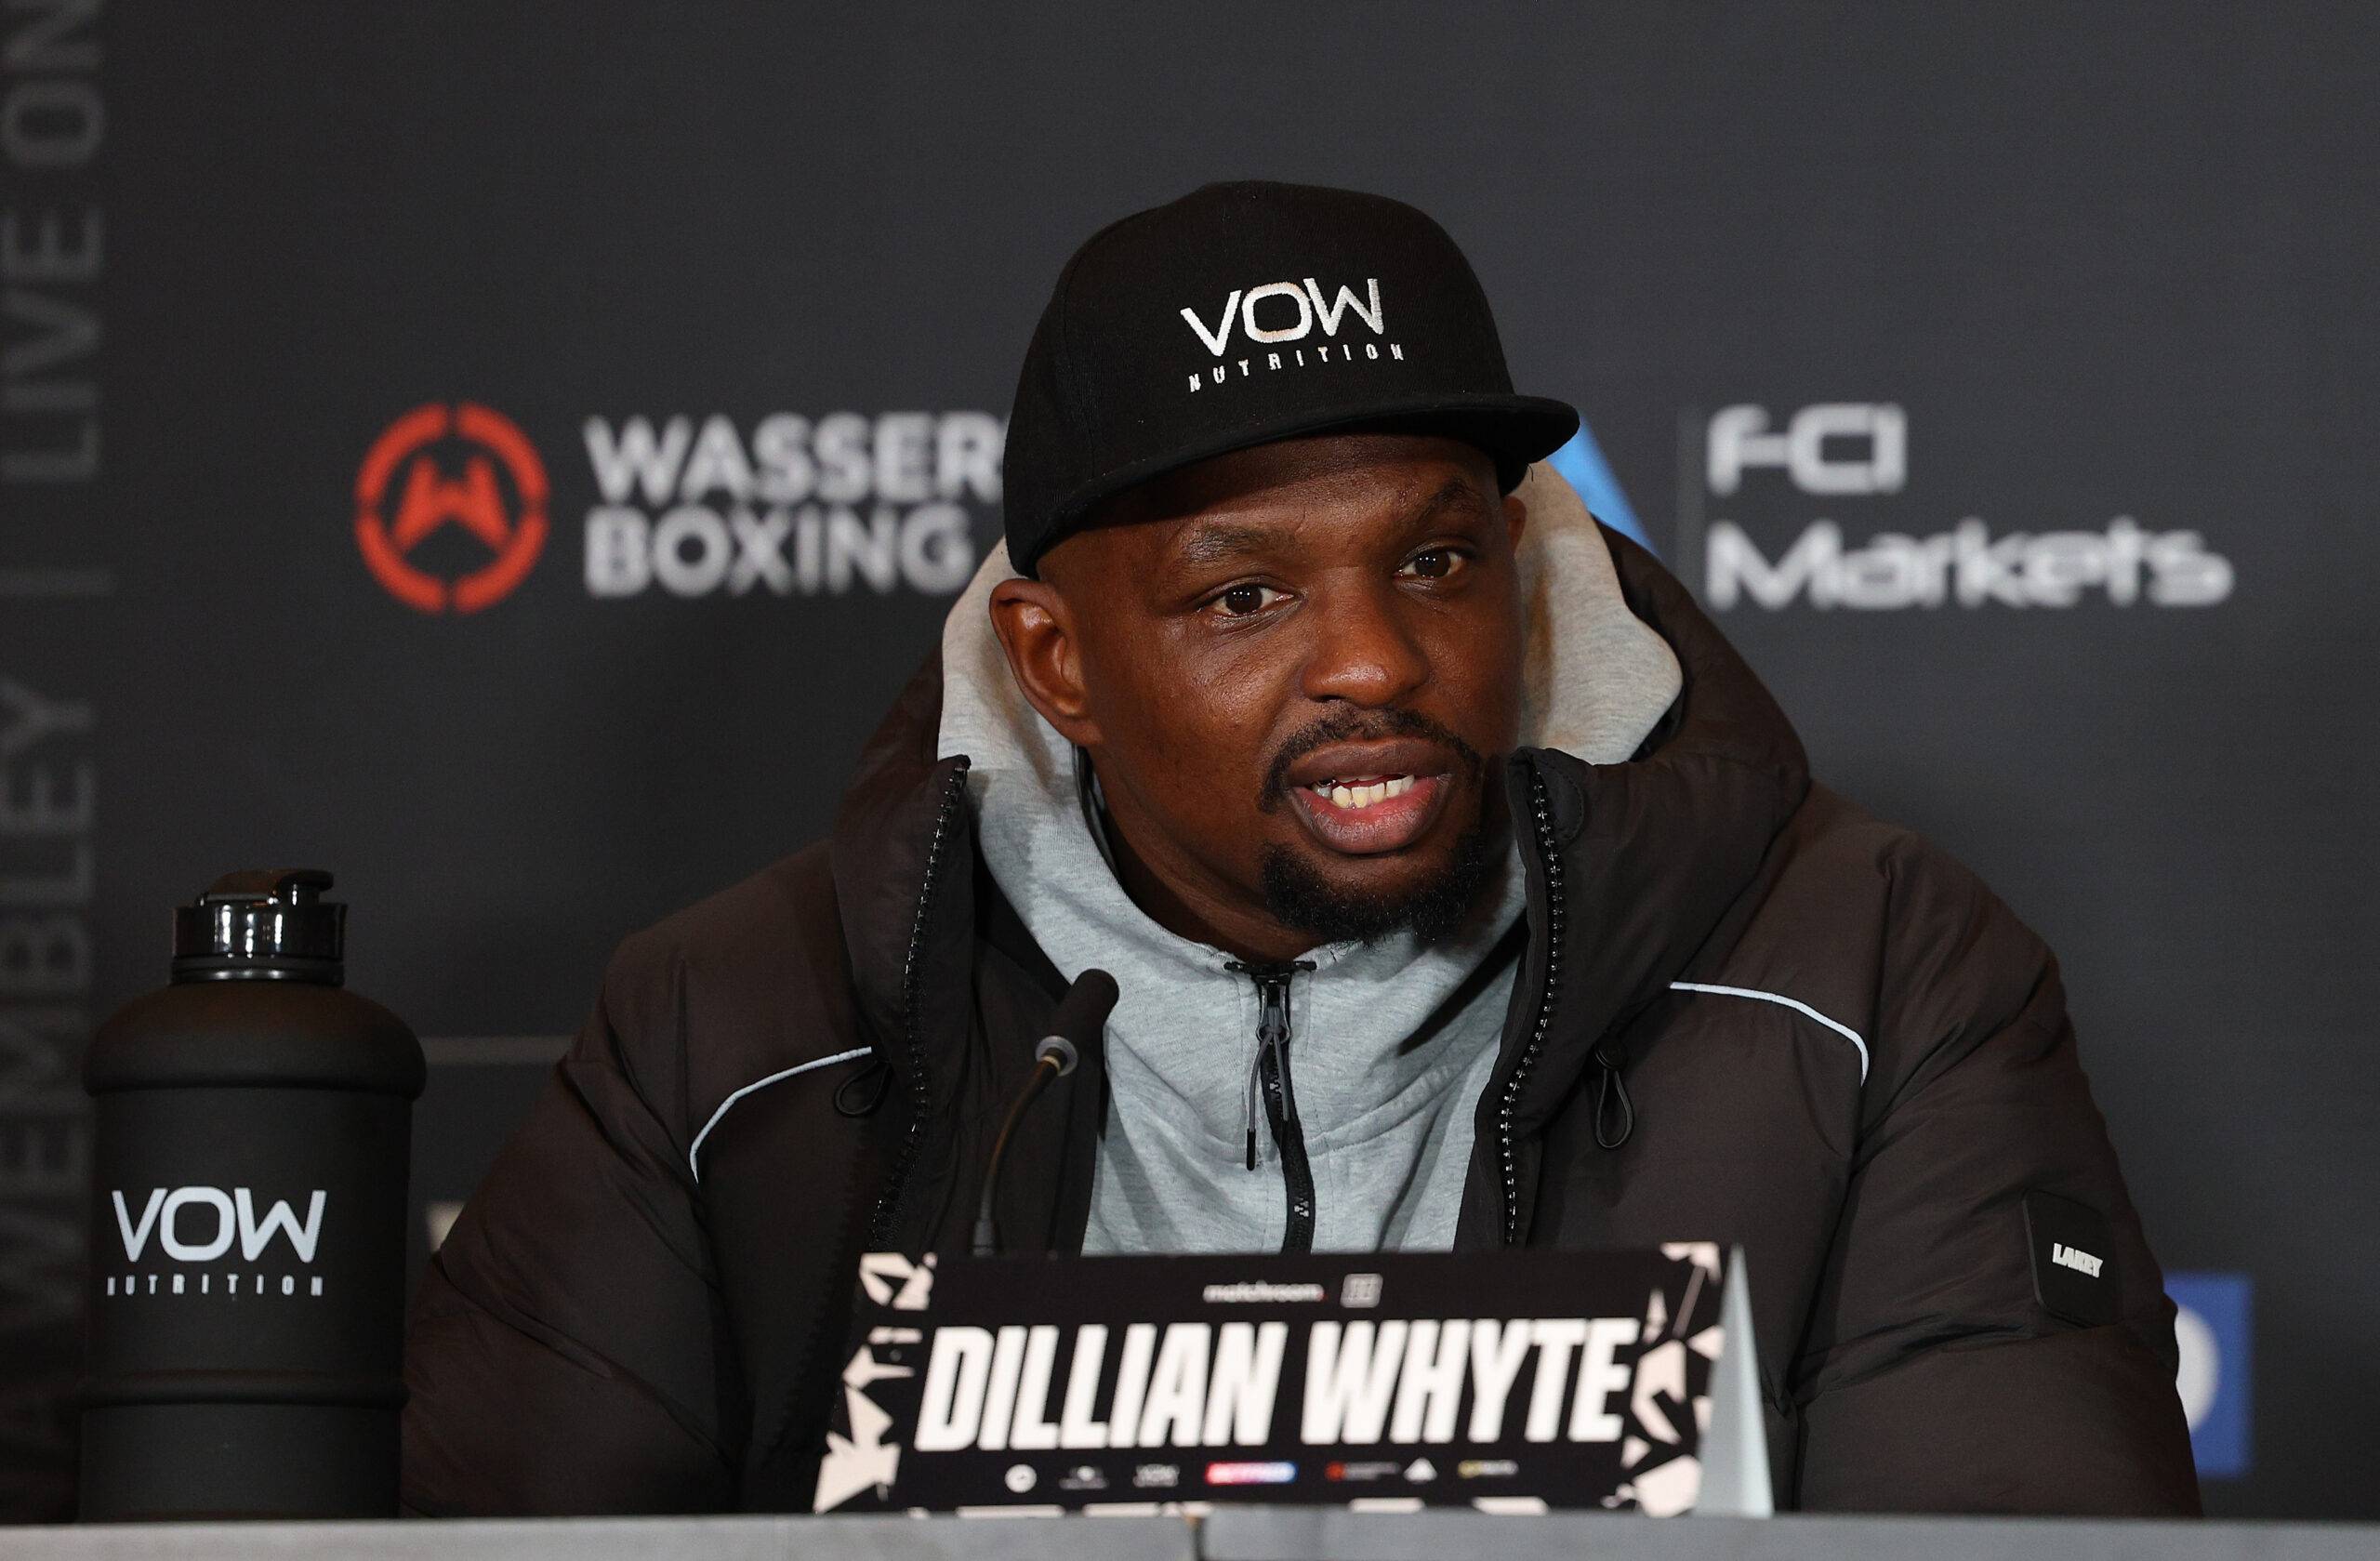 Dillian Whyte has branded Deontay Wilder a 'fraud' in an explosive rant